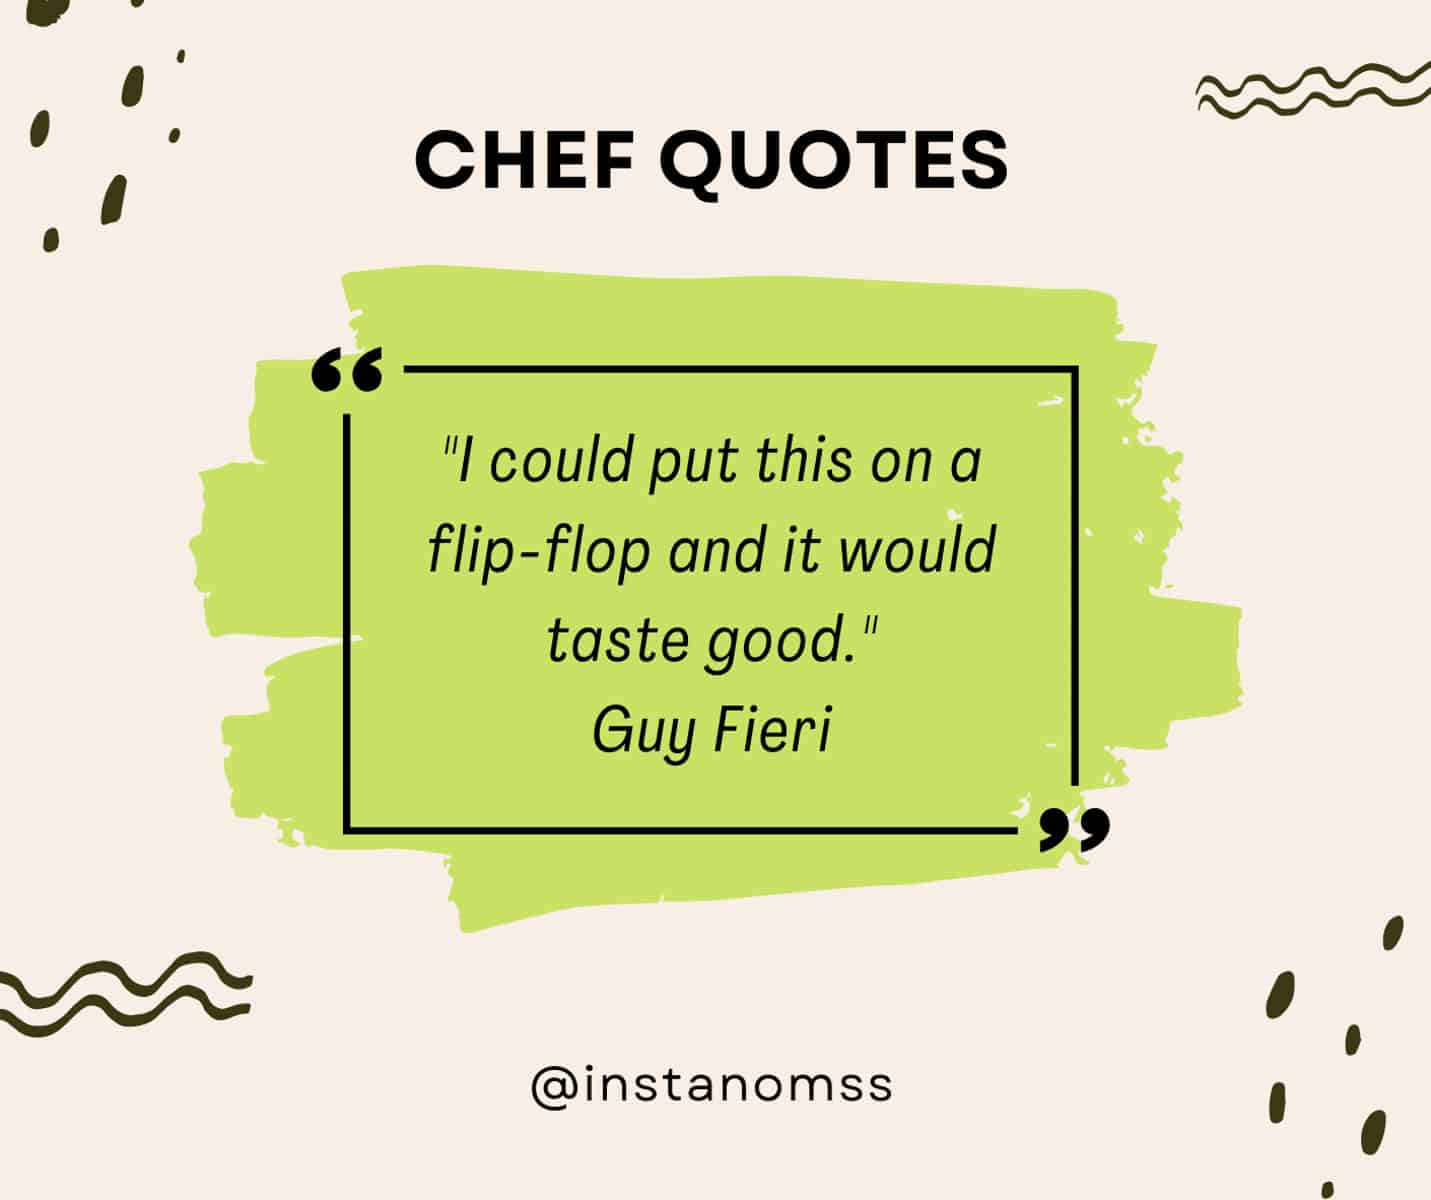 "I could put this on a flip-flop and it would taste good." Guy Fieri